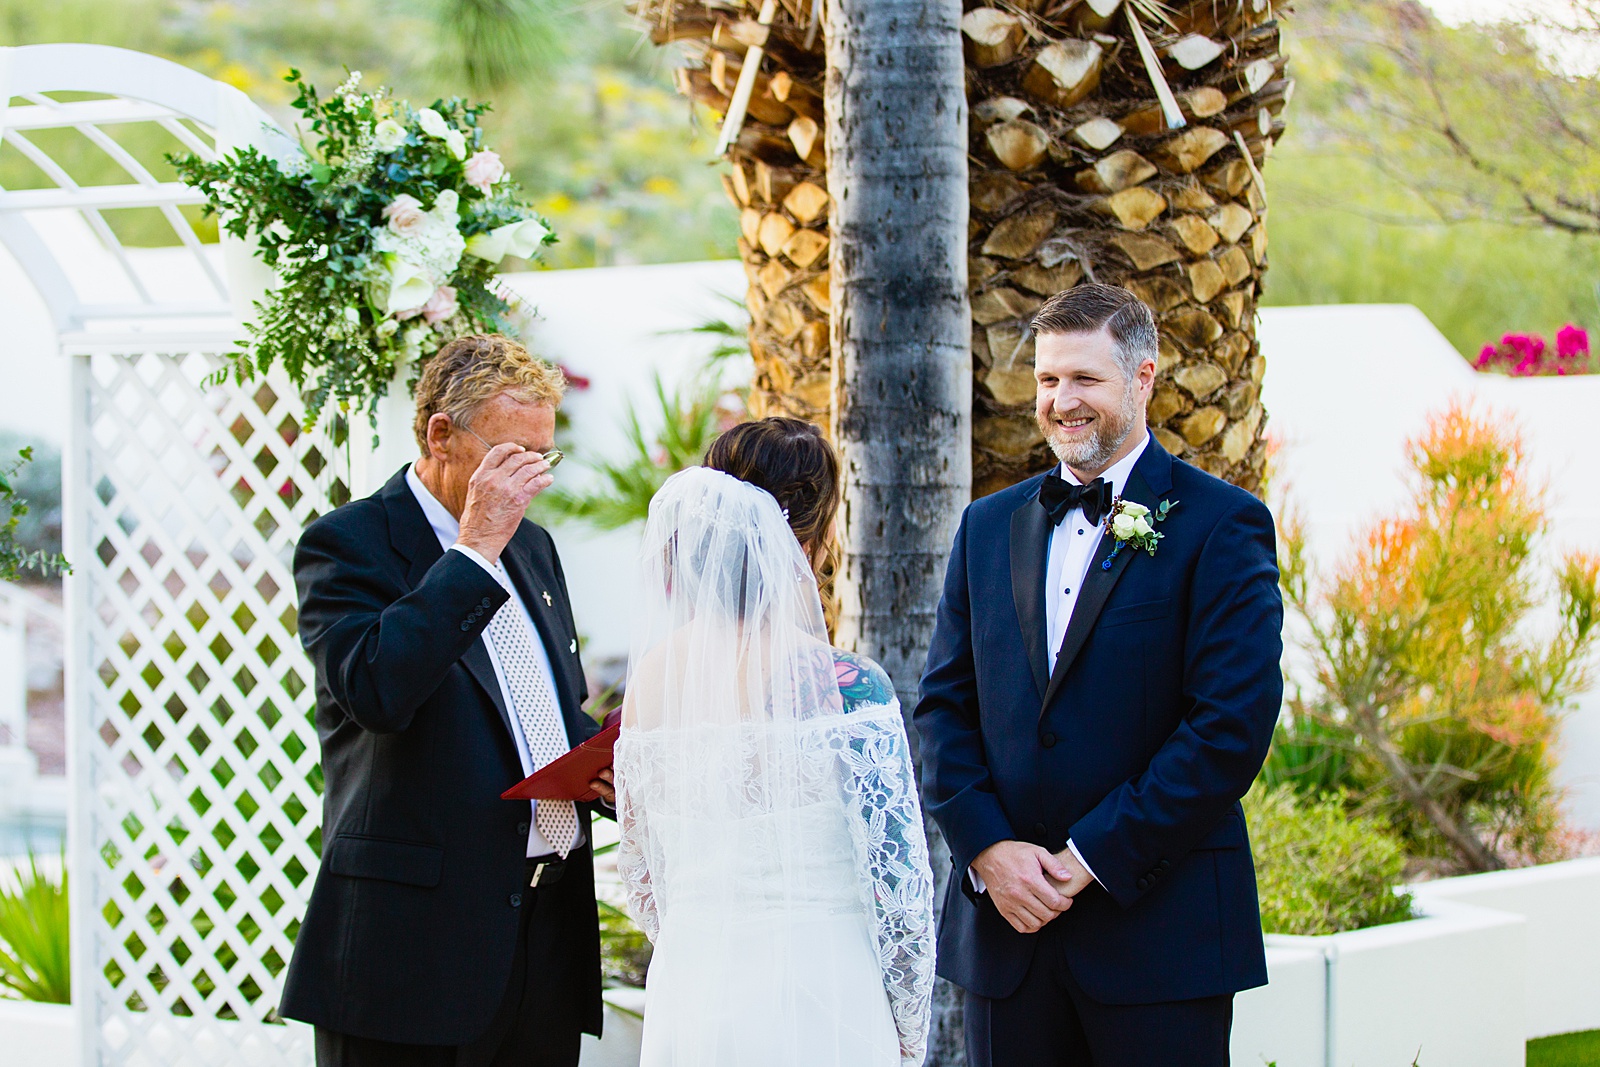 Groom looking at his bride during their wedding ceremony at backyard by Scottsdale wedding photographer PMA Photography.